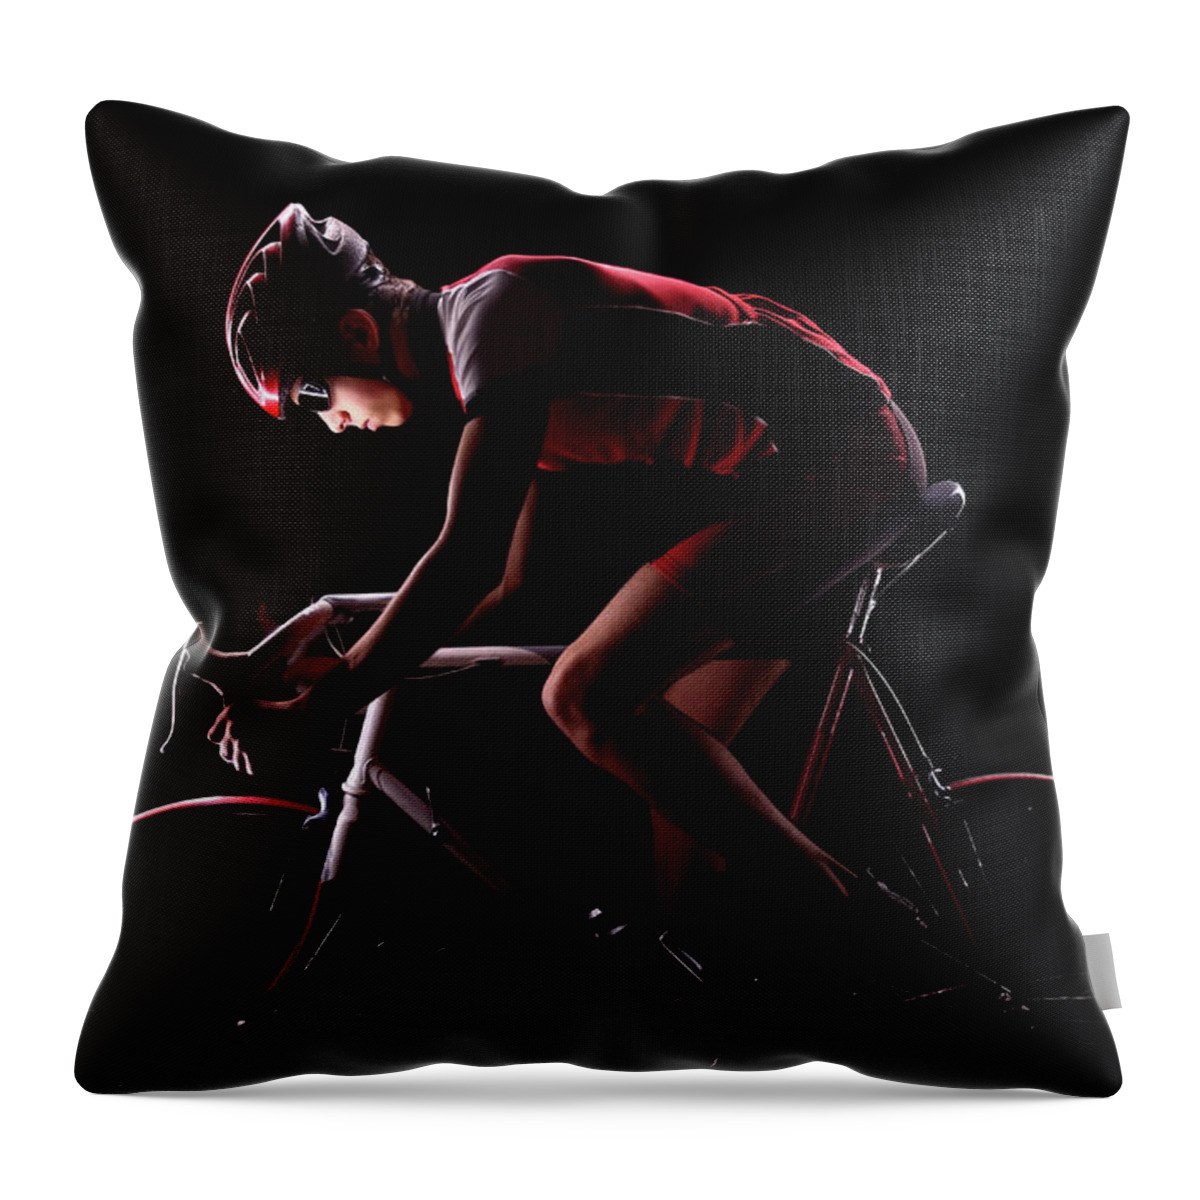 People Throw Pillow featuring the photograph Cyclist On Black Background by Stanislaw Pytel